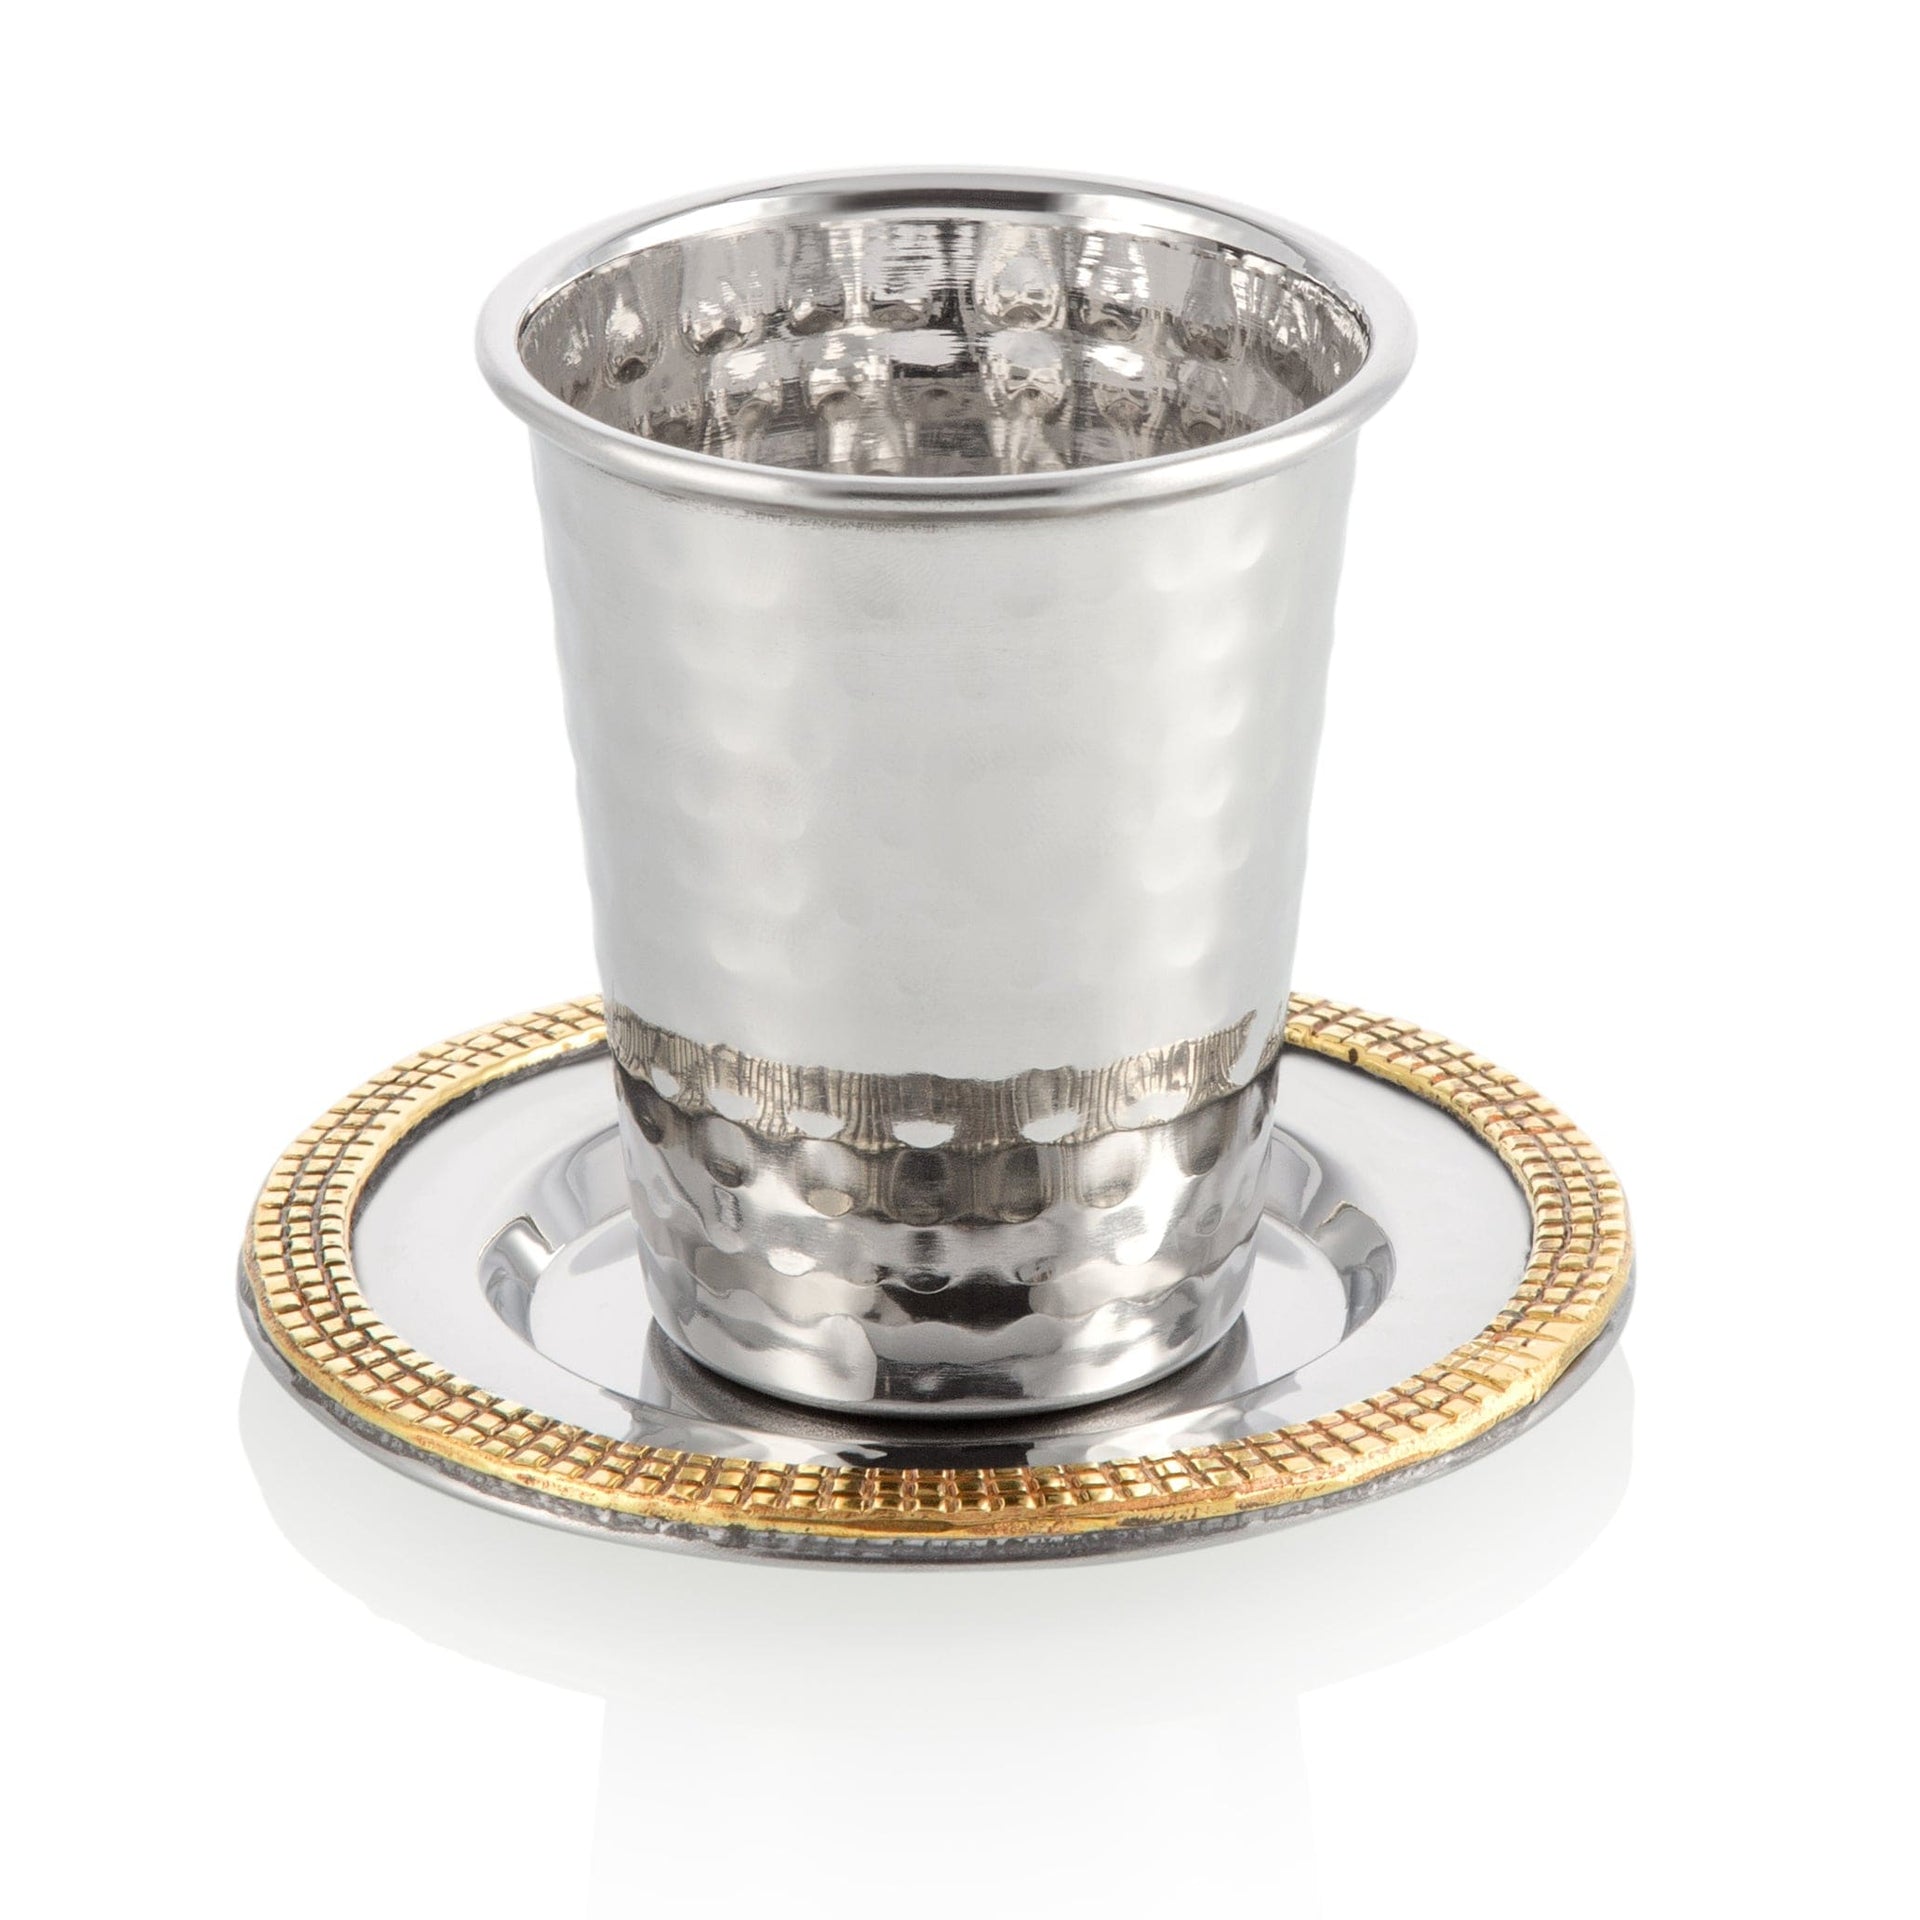 Classic Touch Decor Kiddush Cups Kiddush Cup with Mosaic Design